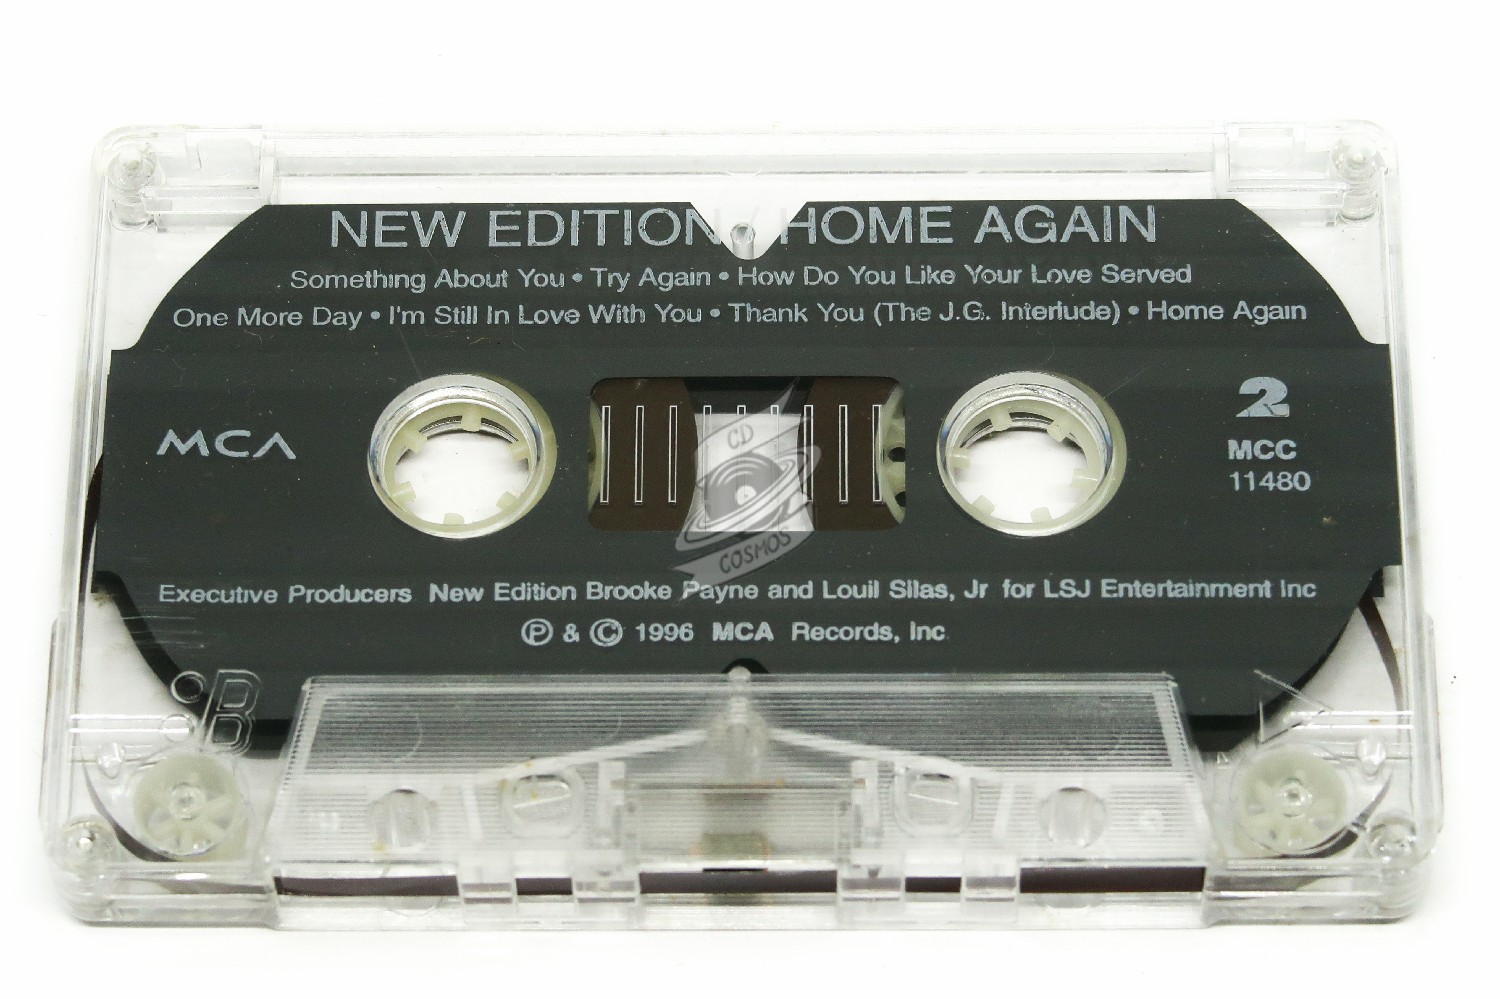 Back in the loop: why cassette tapes became fashionable again